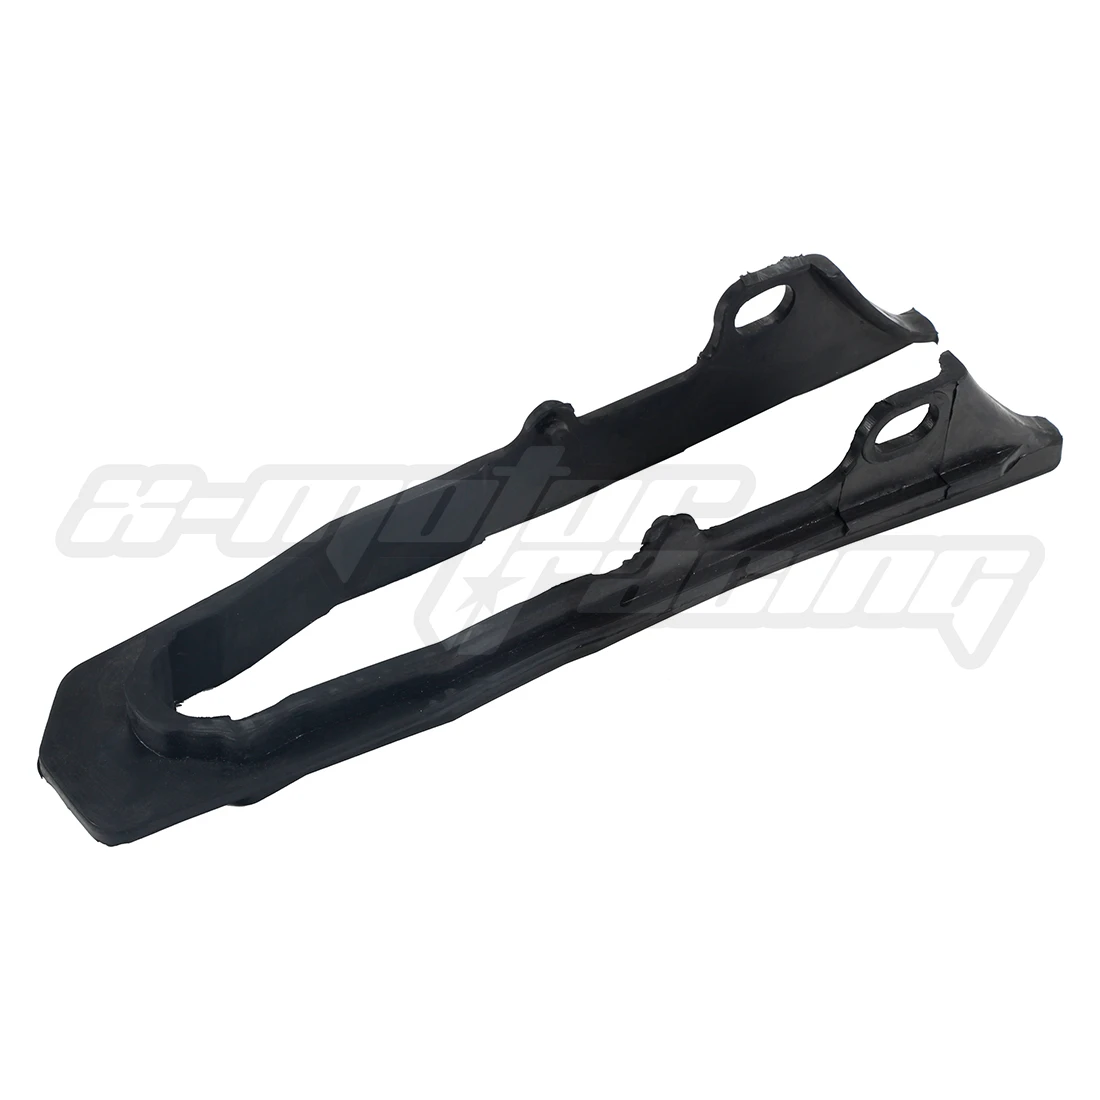 

Motorcycle Chain Slider Guard Guide Protector Rubber Cover For Honda VT250 Magna MC29 1995-1997 52170-KCR-000